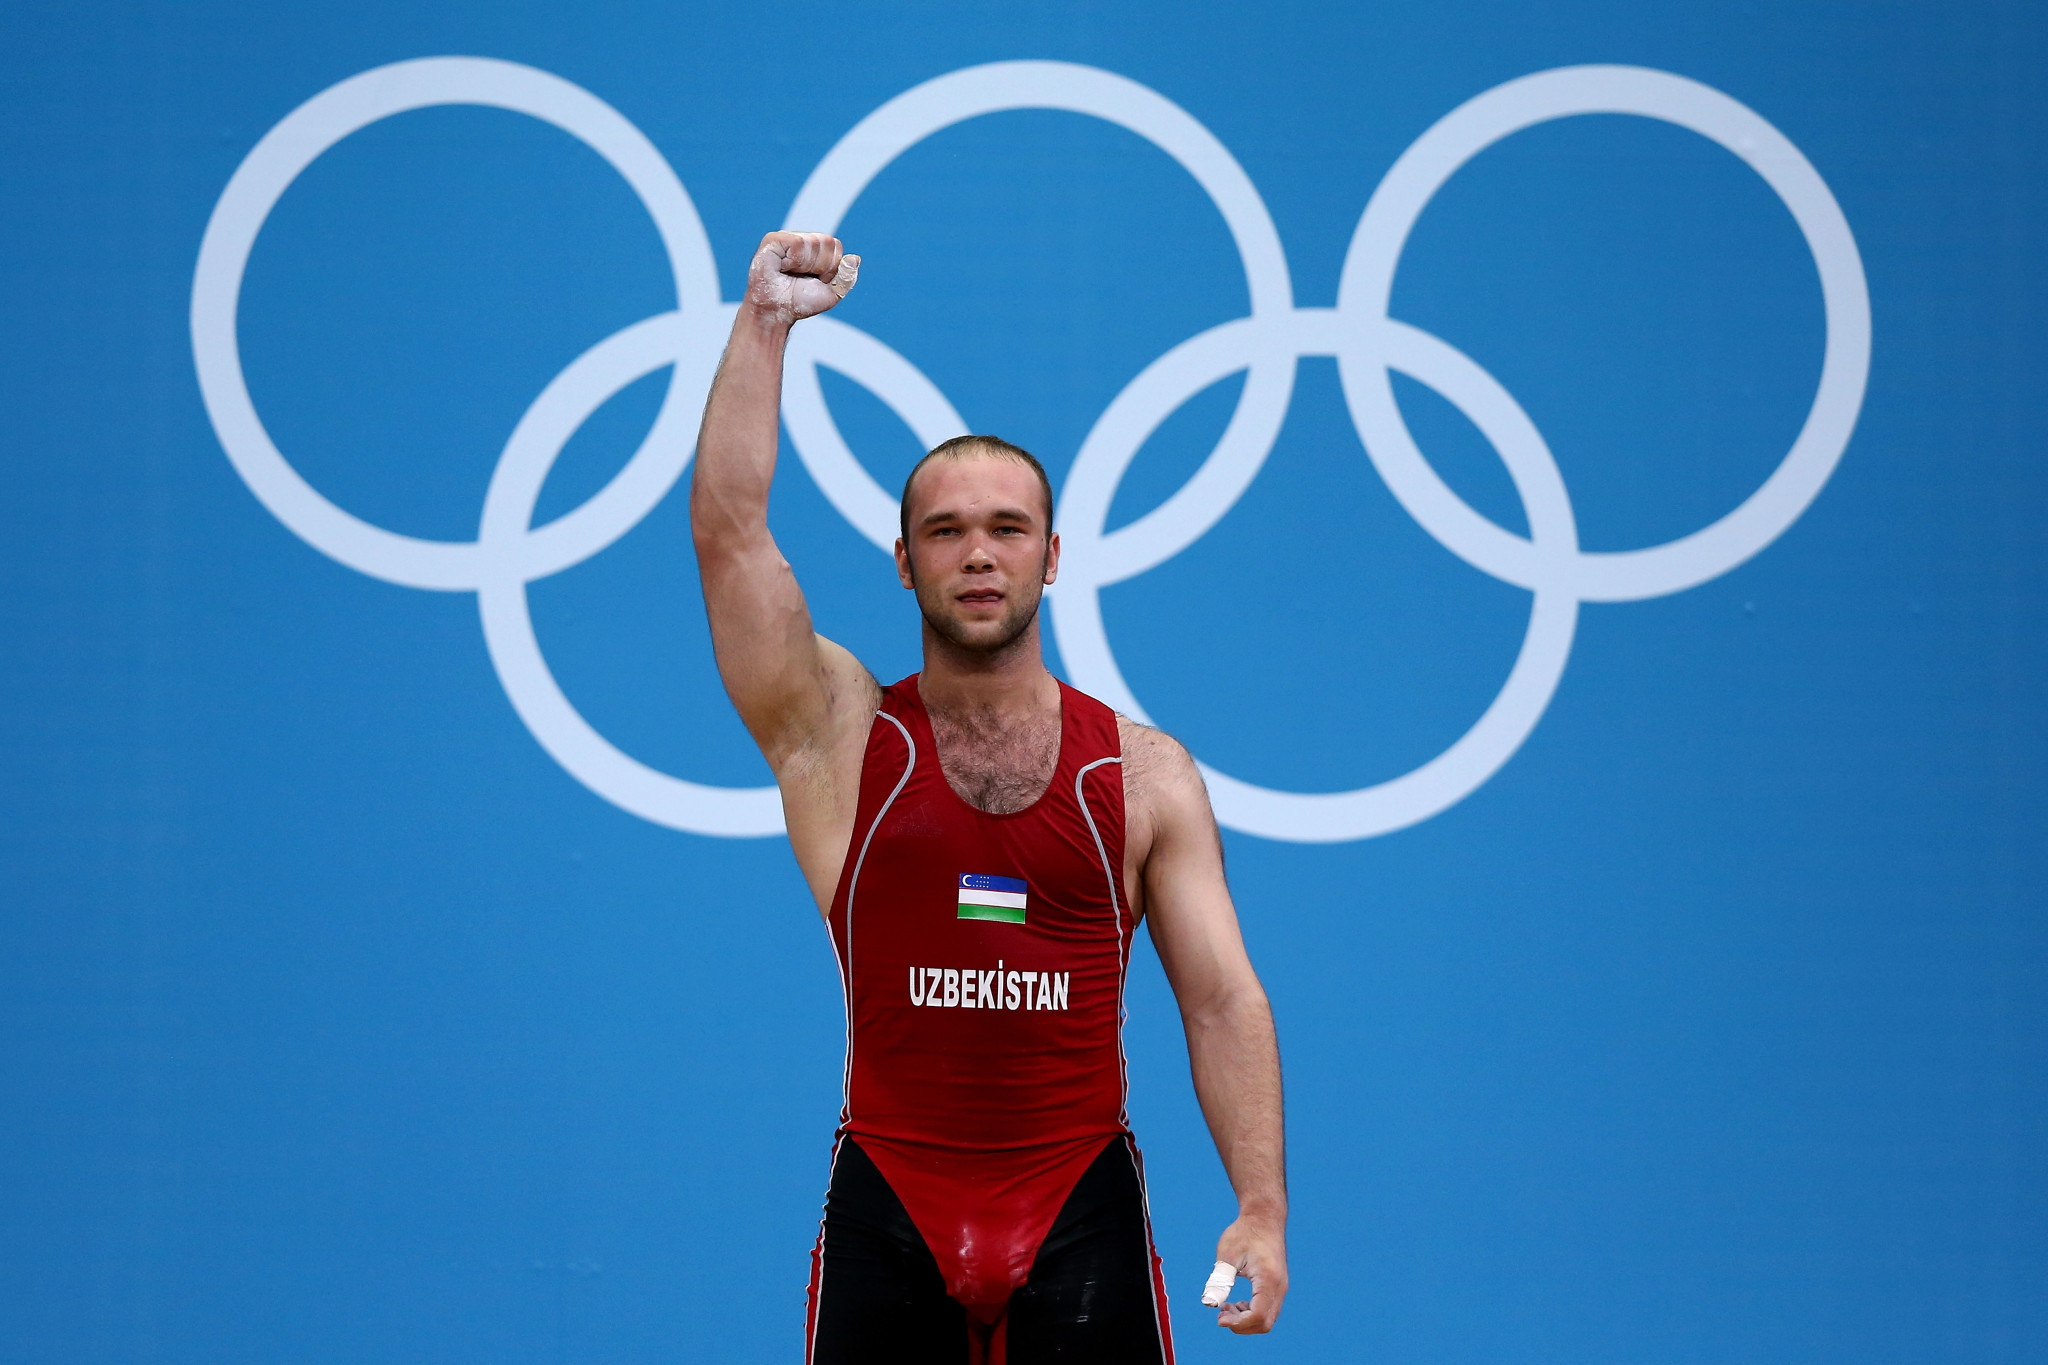 Rio 2016 Olympic gold medallist Nurudinov one of two weightlifters disqualified from London 2012 for doping